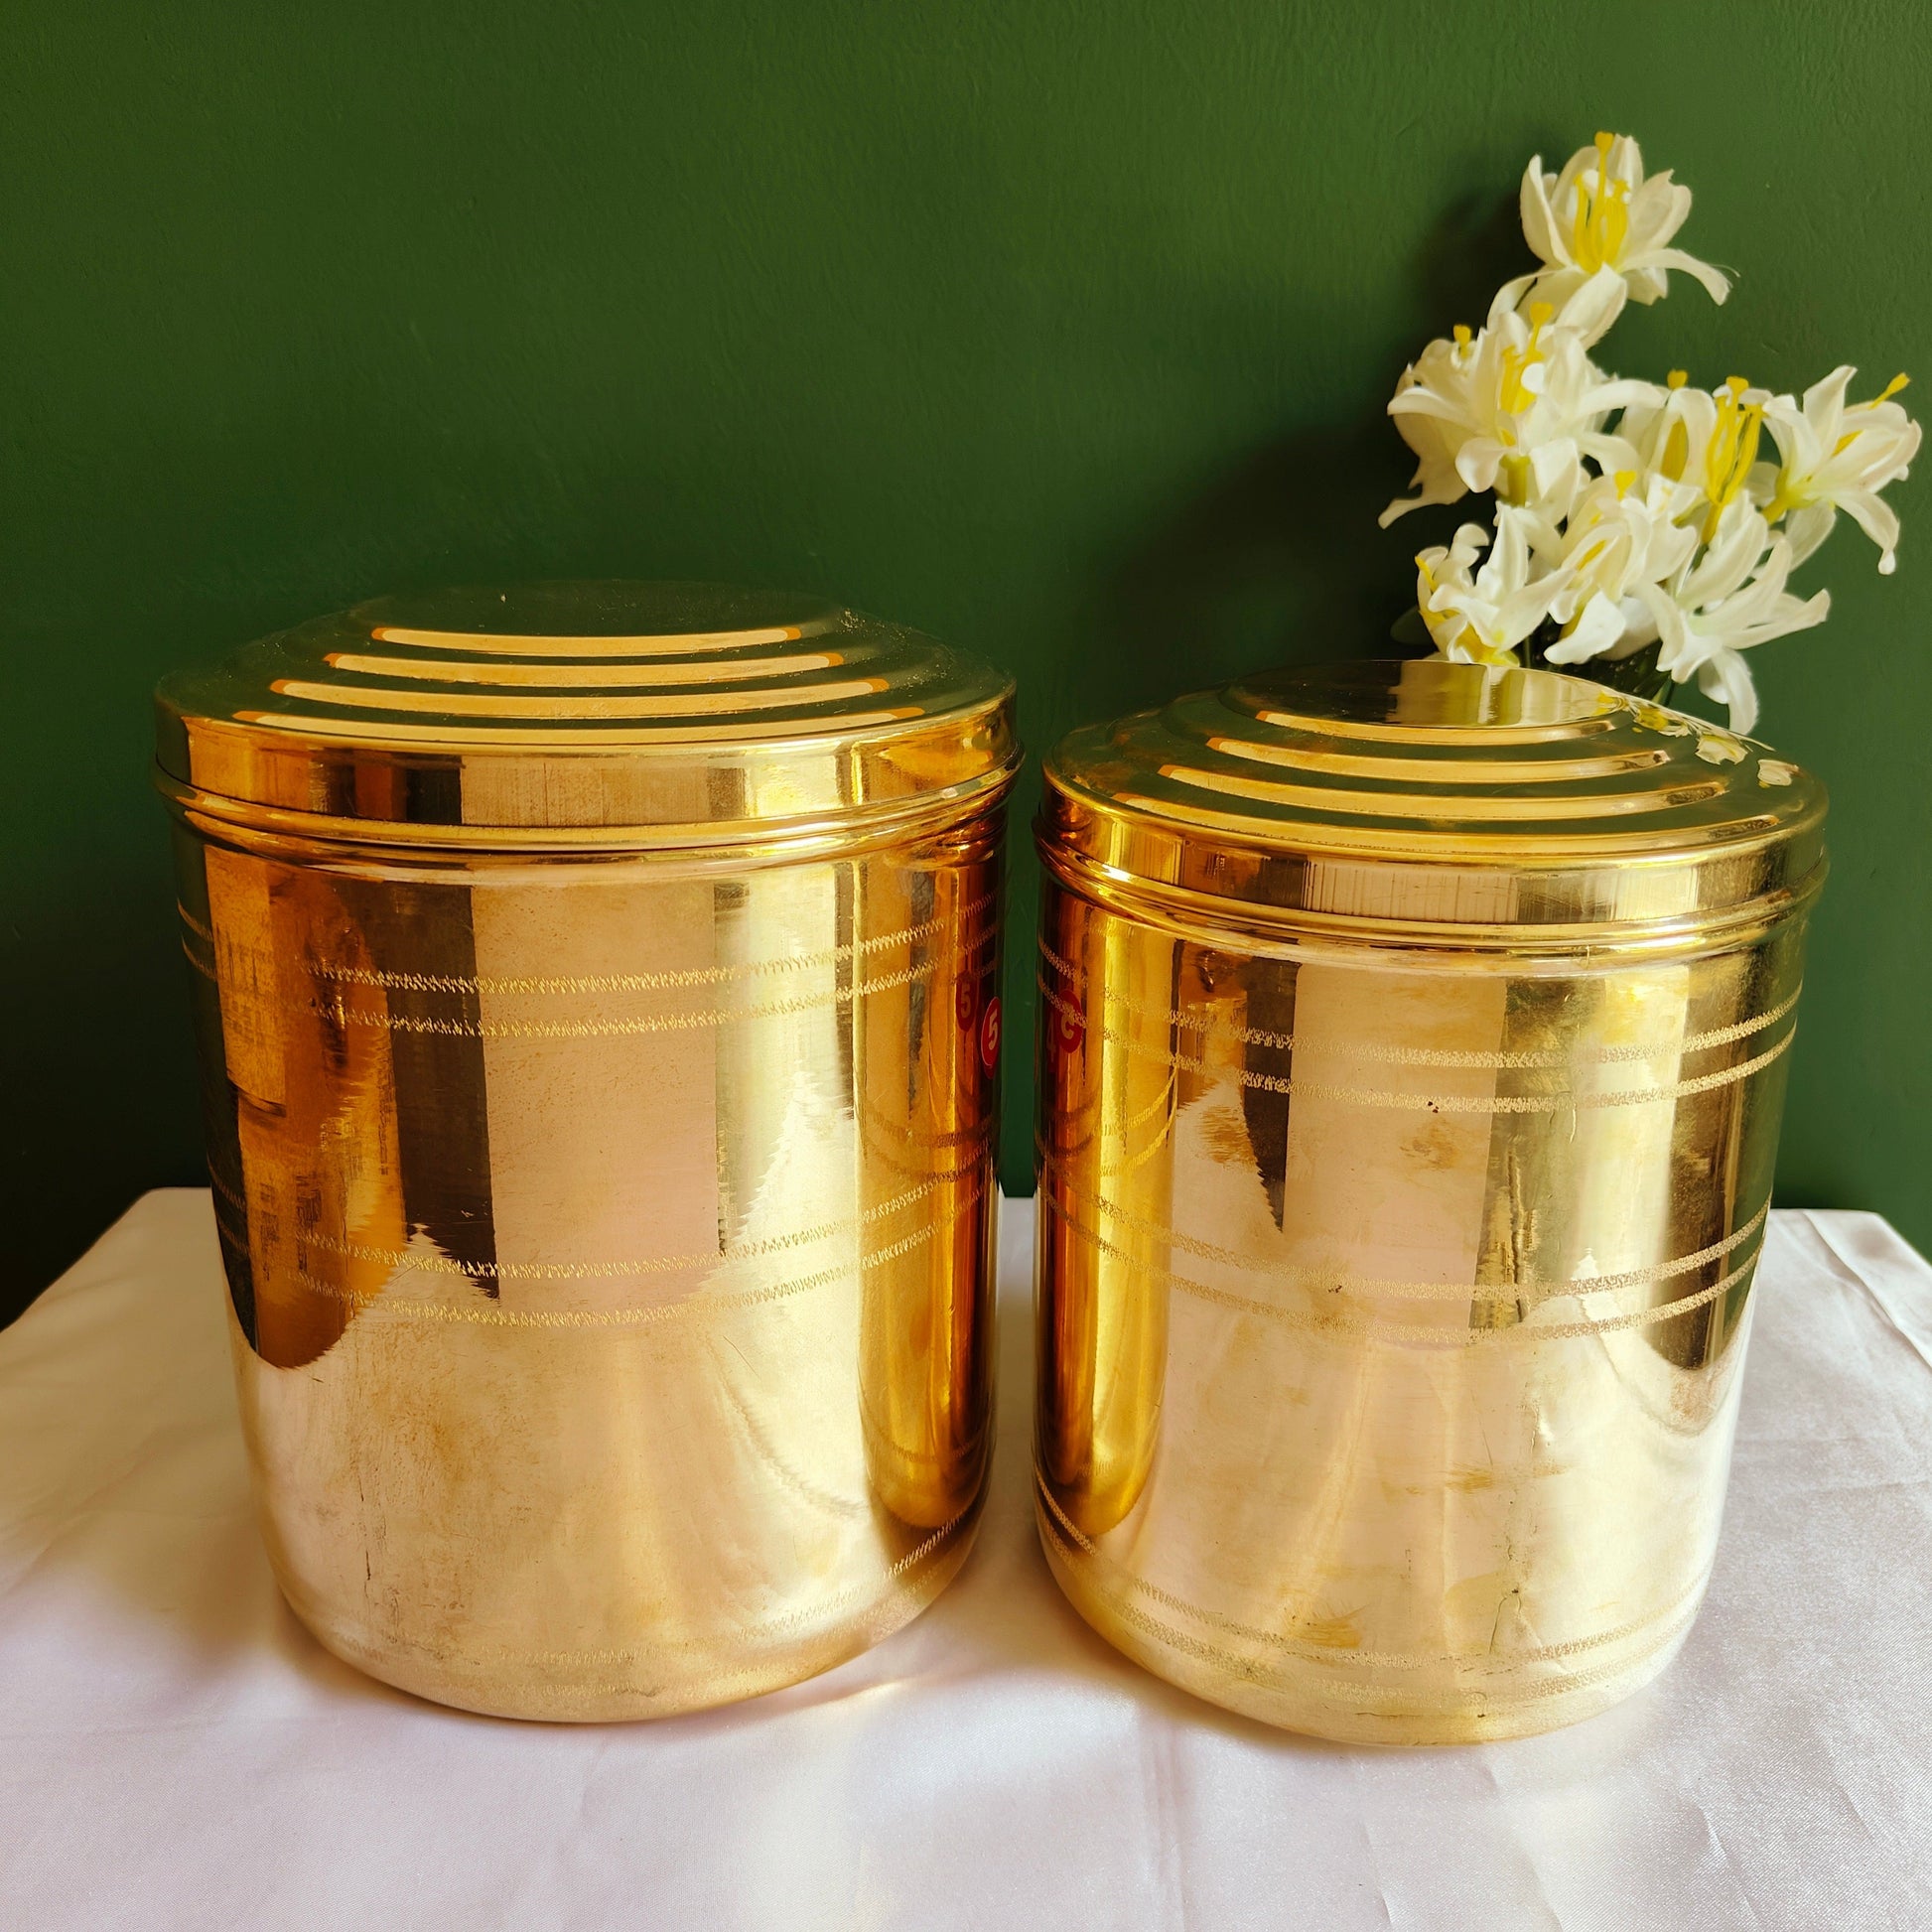 SAMA Homes - heavy brass storage containers 4 5 kgs capacity